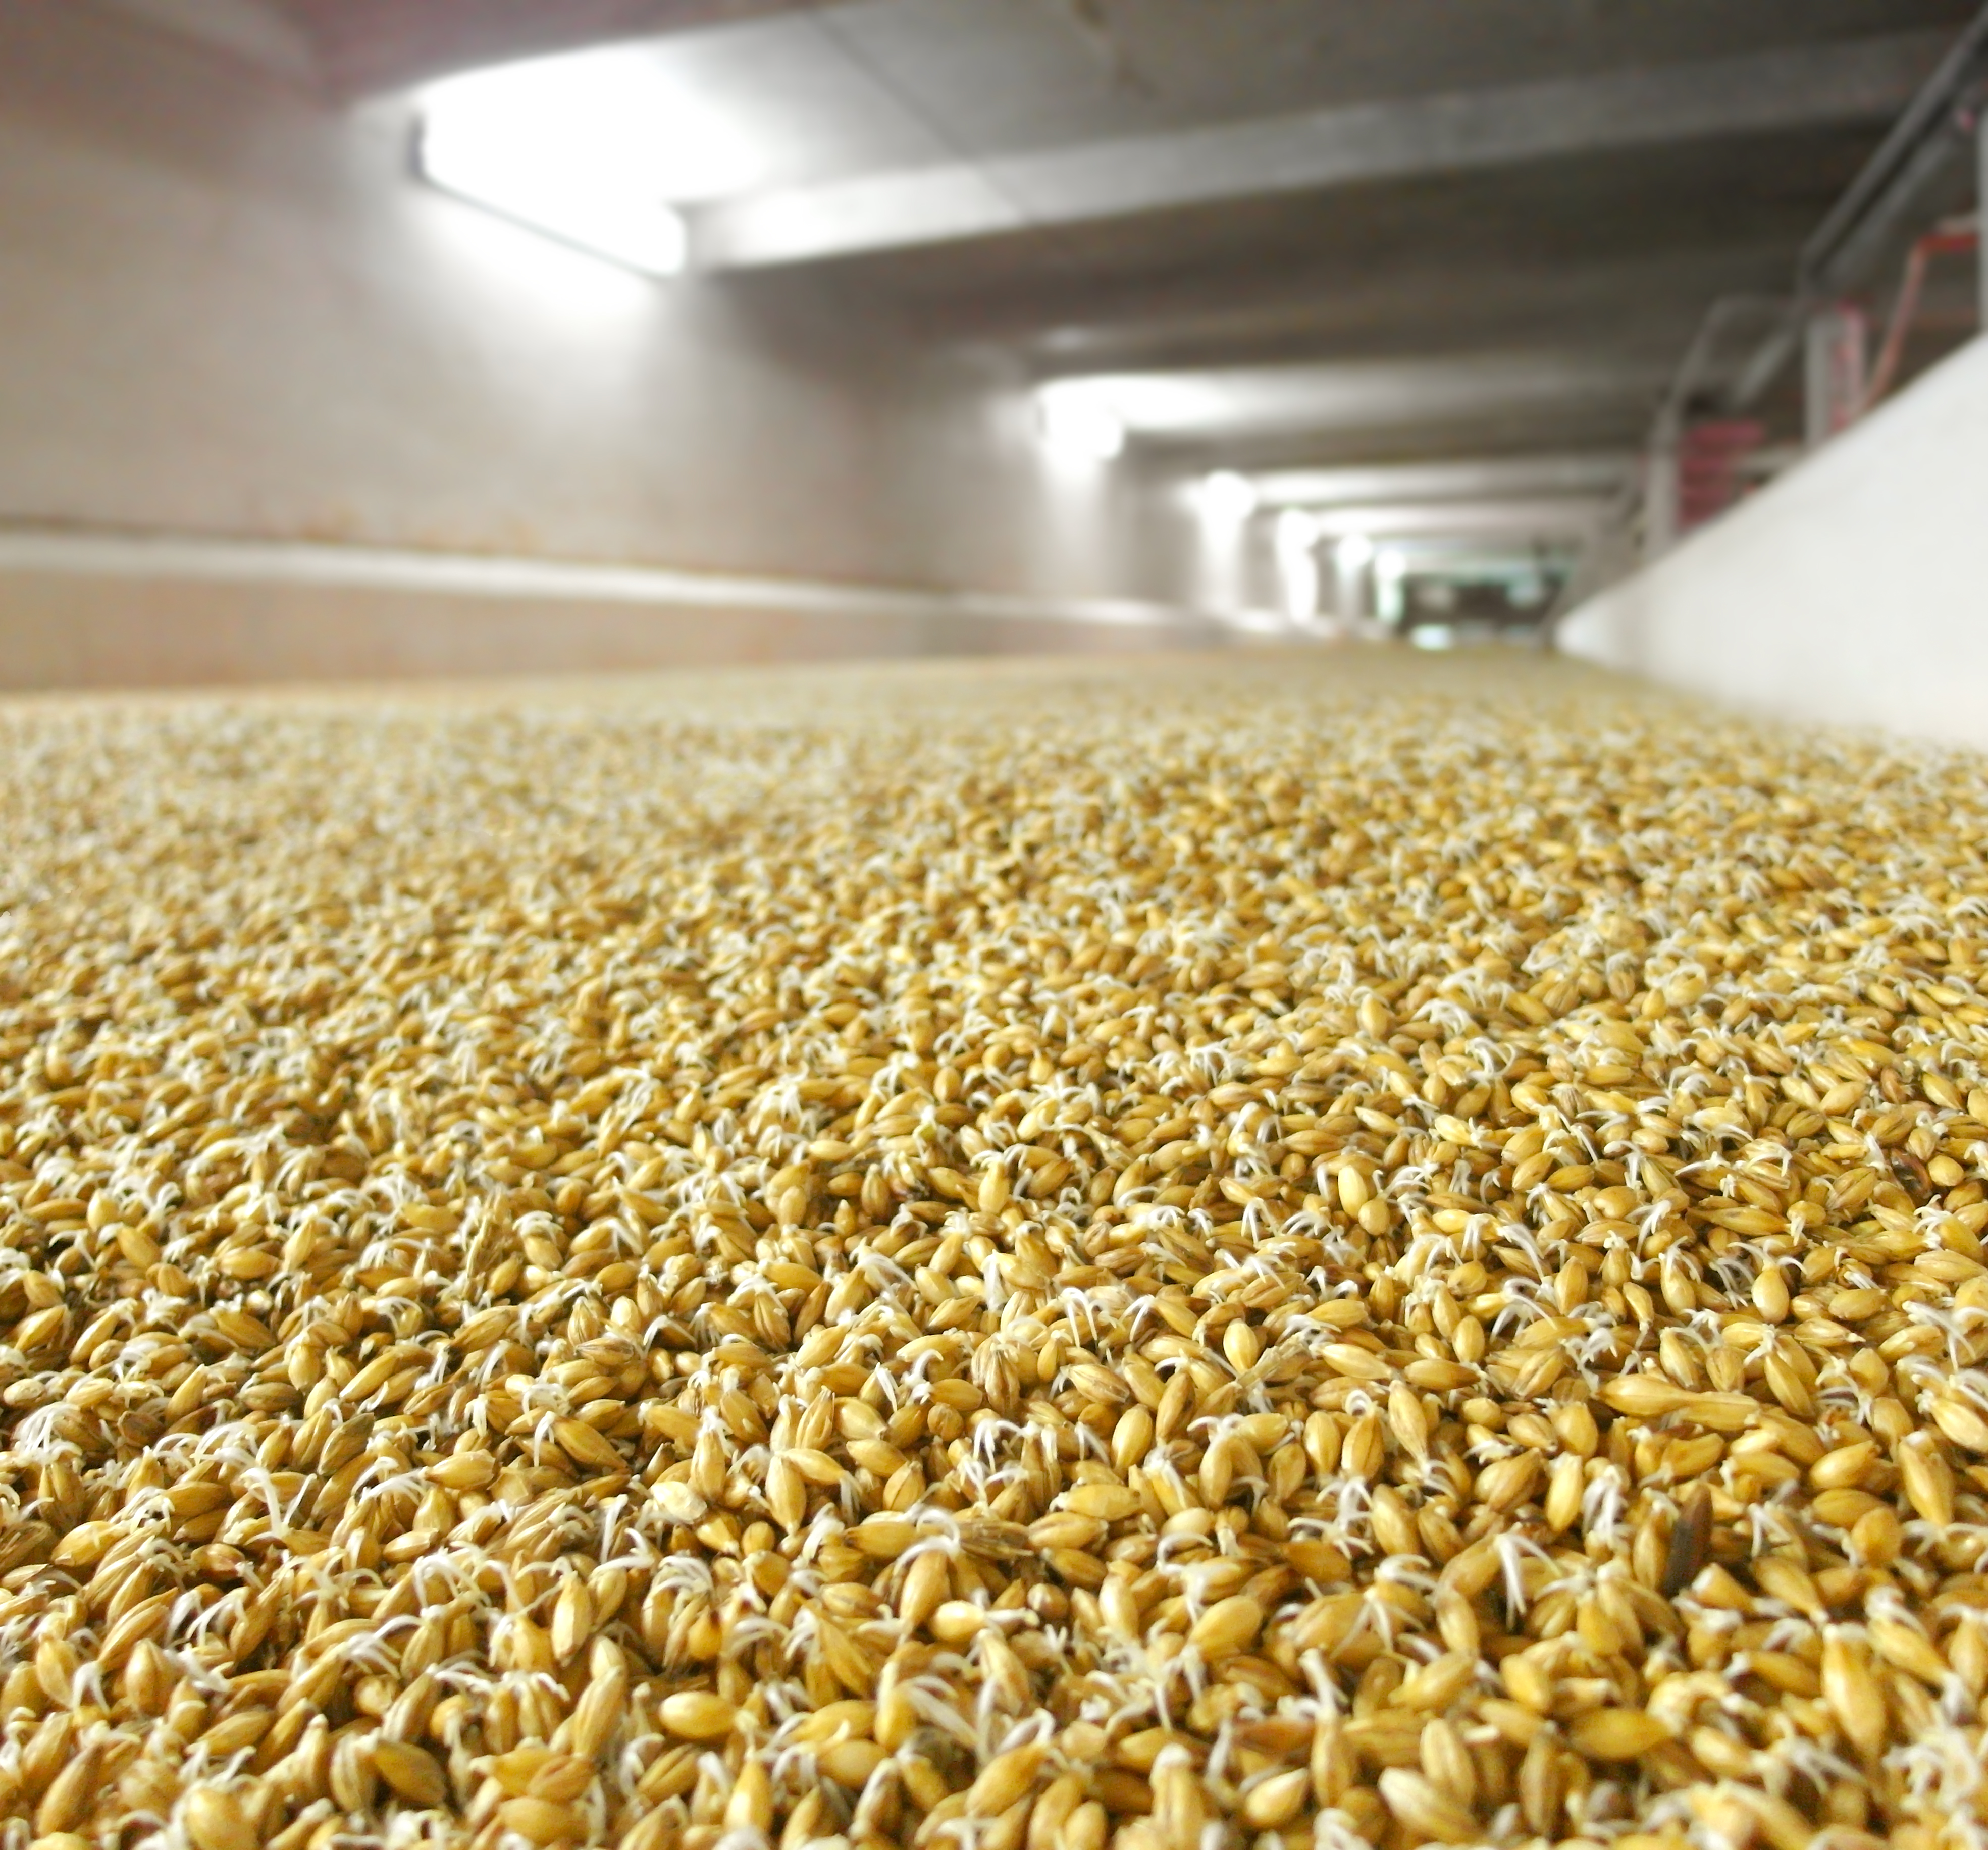 Mitsubishi Electric’s SCM system can be used to monitor fans and motors vital to the barley malting process. [Source: Mitsubishi Electric Europe B.V.]